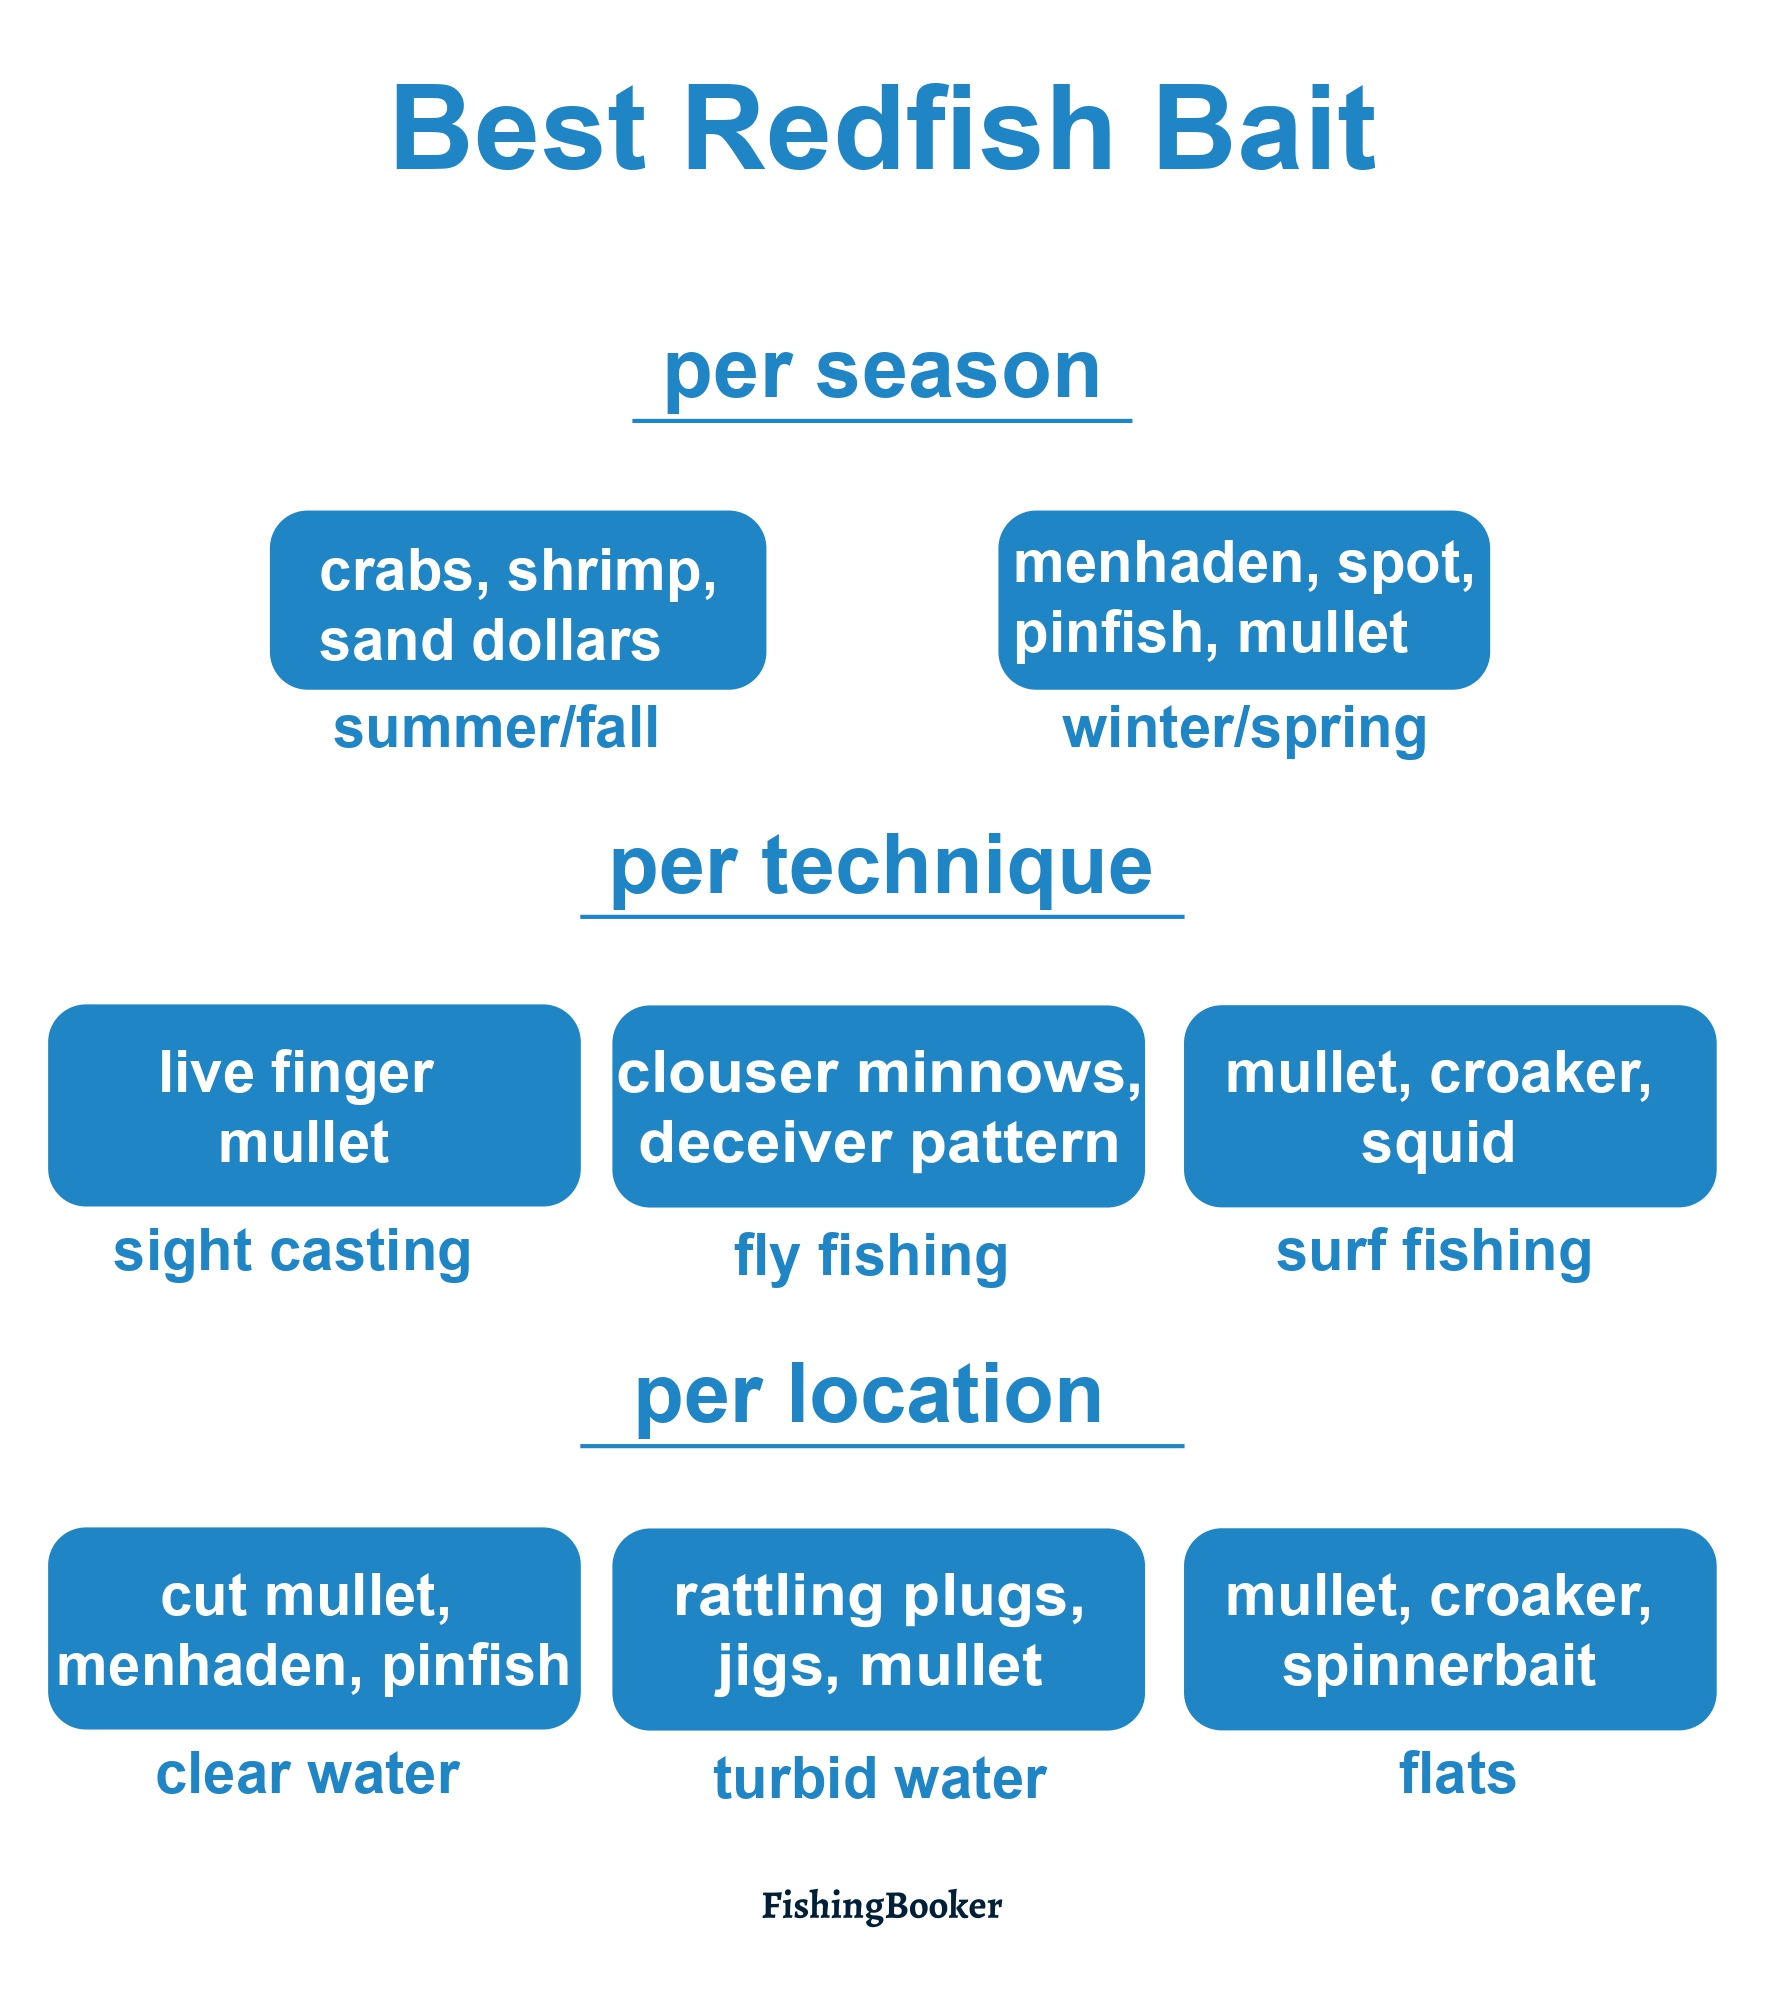 an infographic on the best bait and lures to catch redfish ordered by season, technique and location